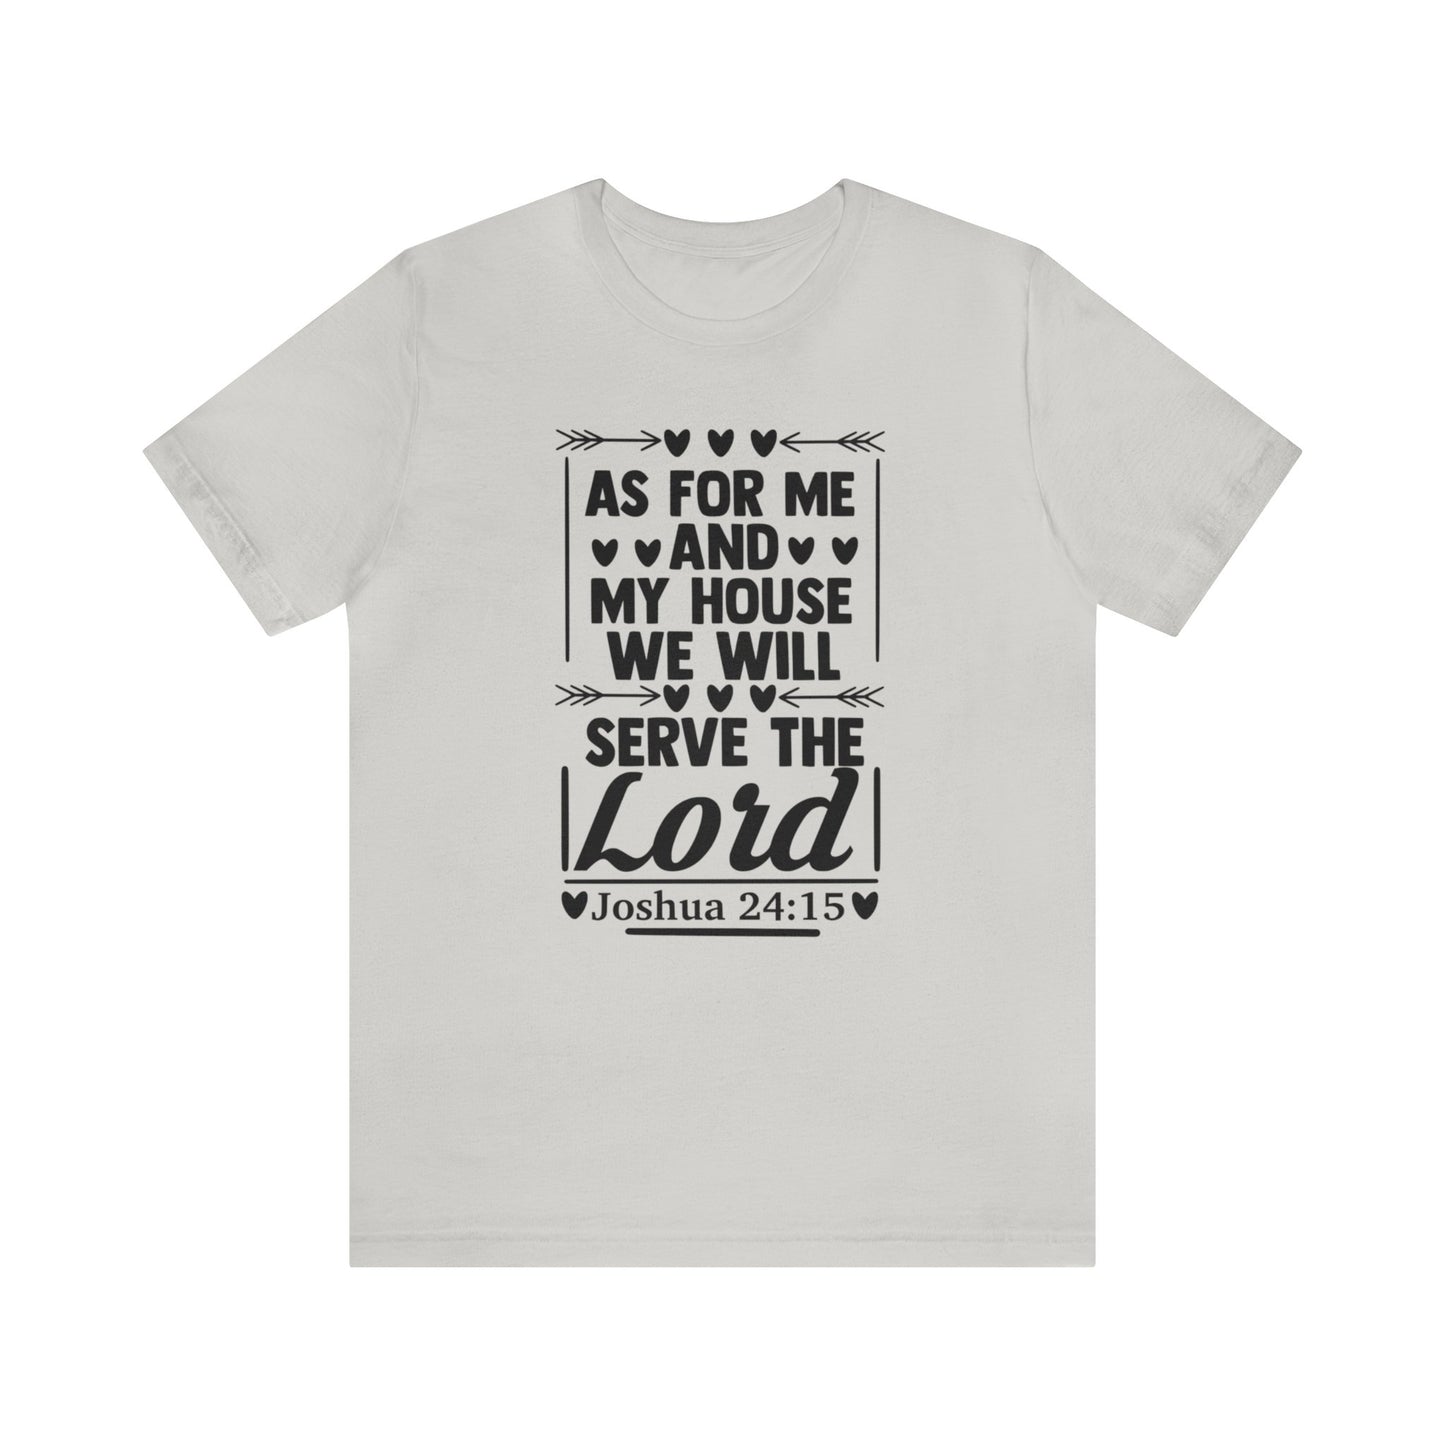 As For Me and My House - Unisex Jersey Short Sleeve Tee